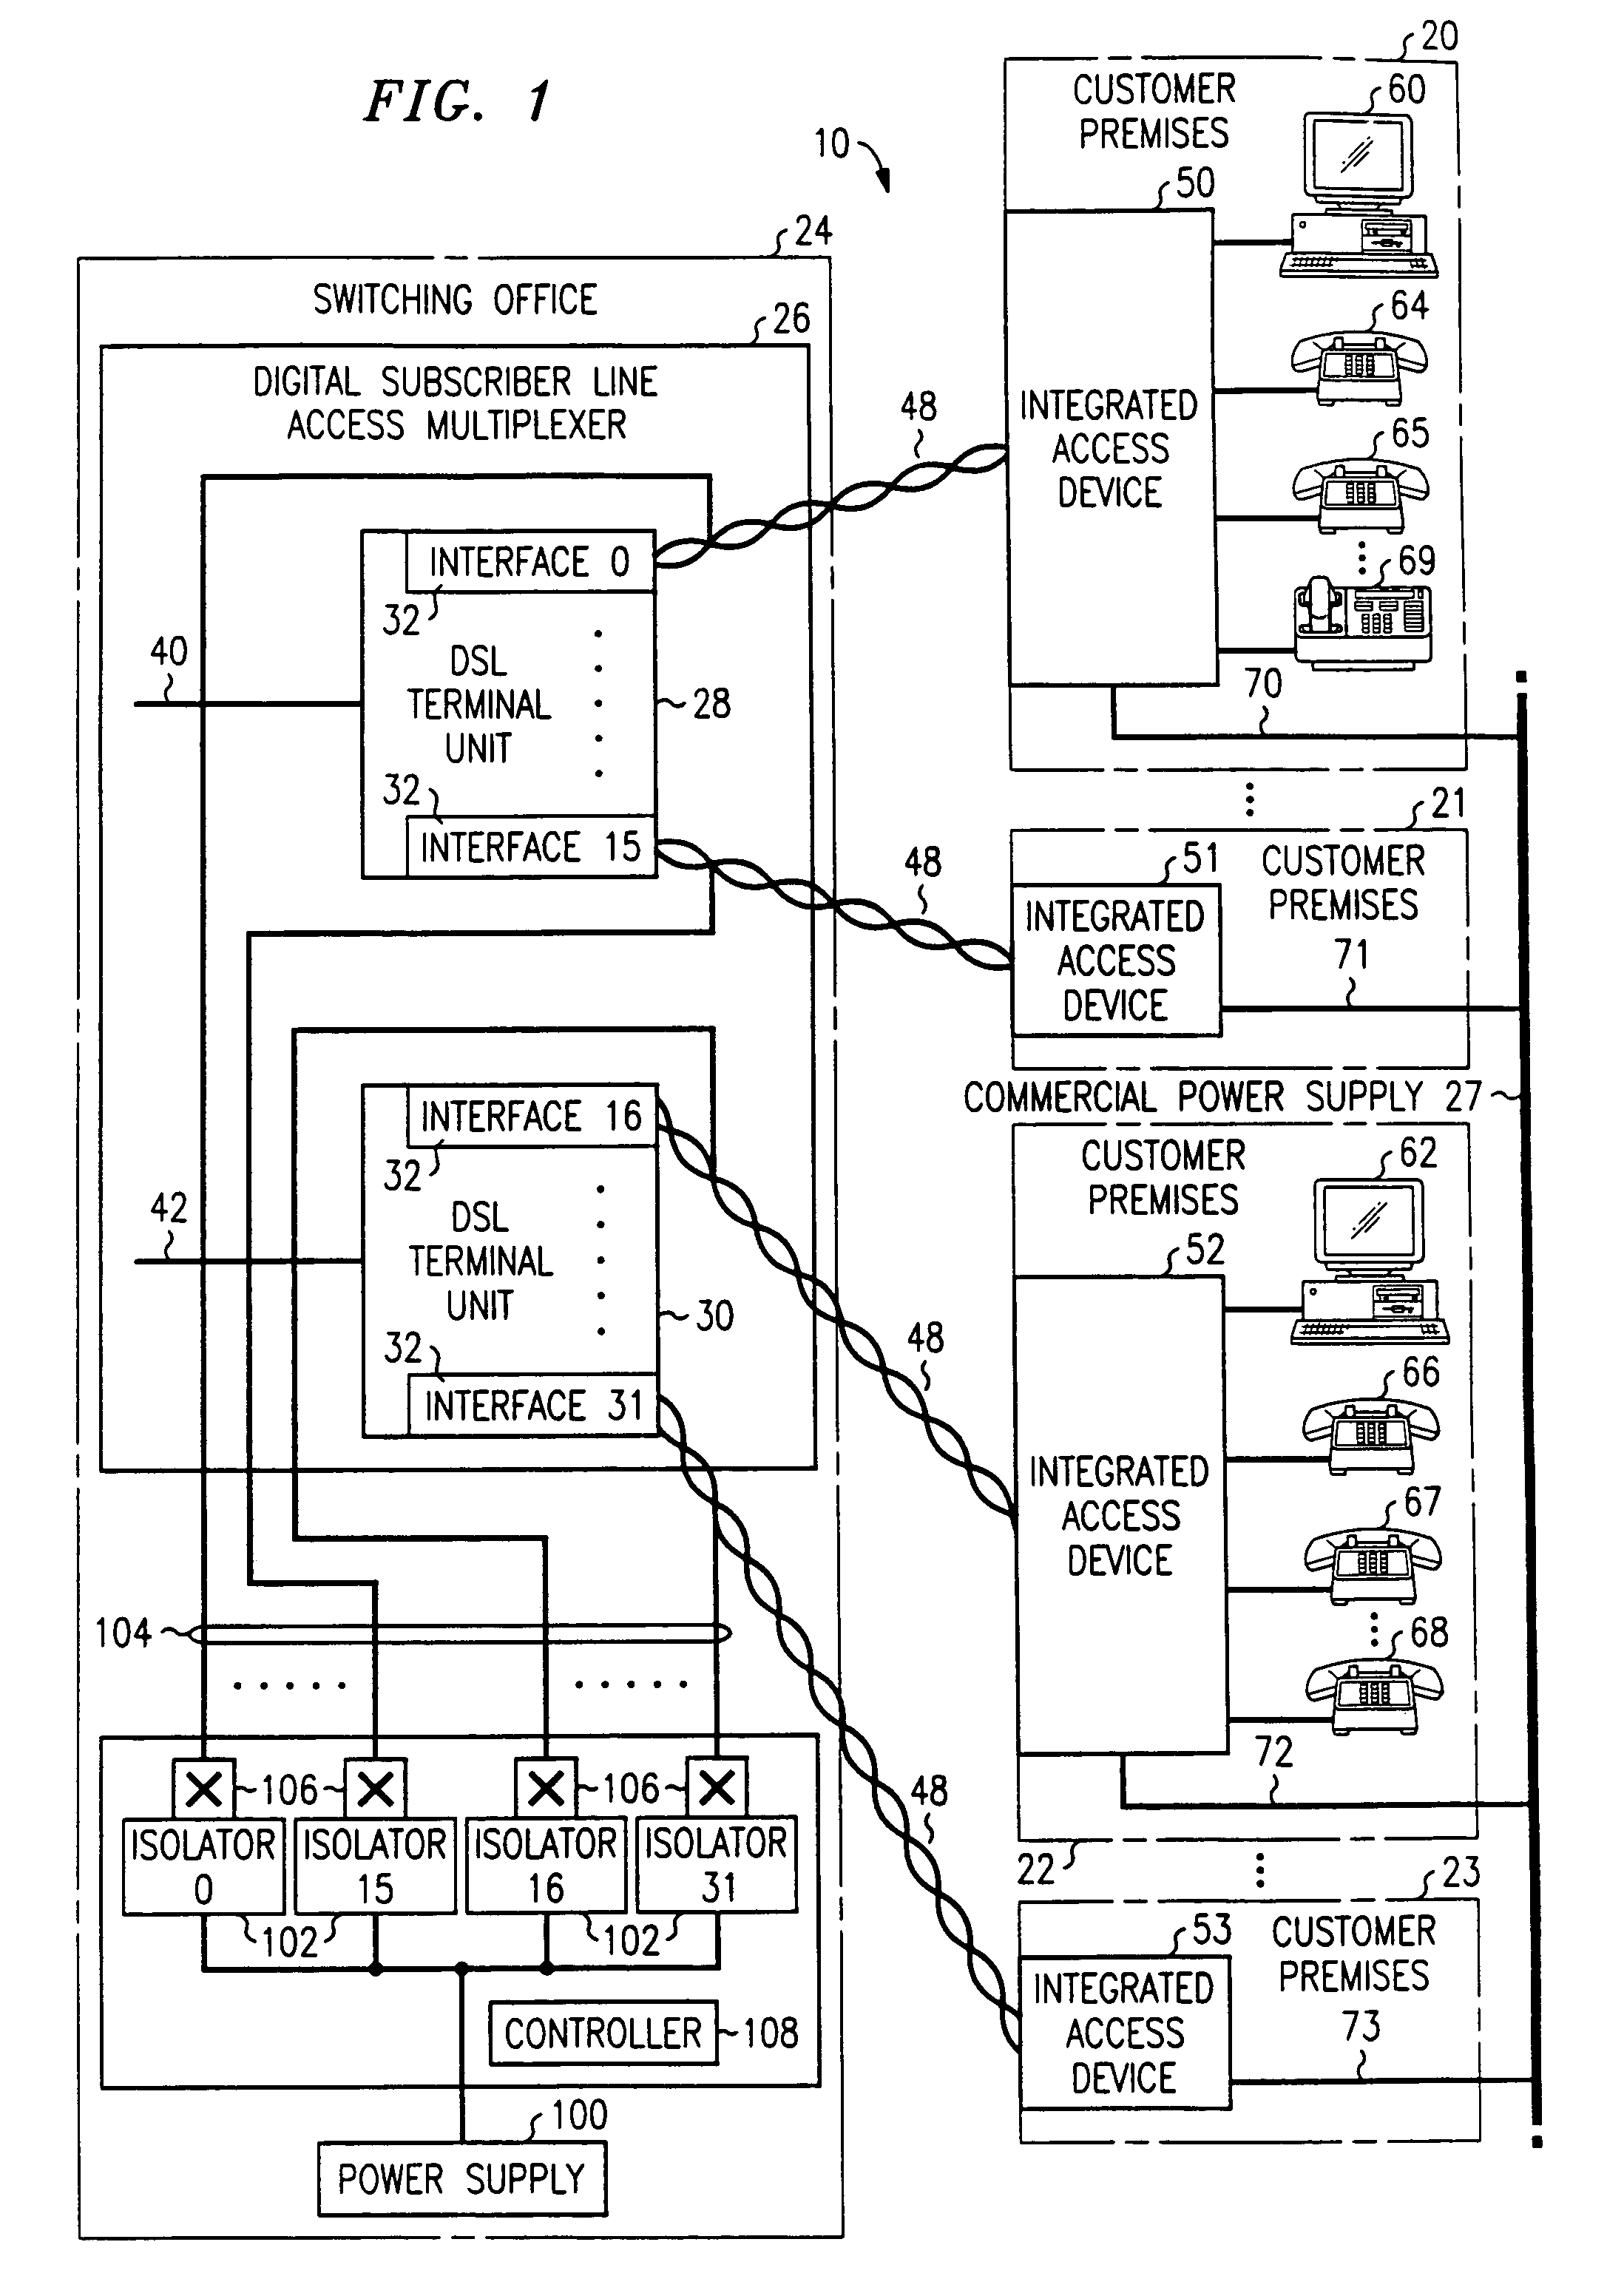 System and method for providing lifeline power service to digital subscriber line customers